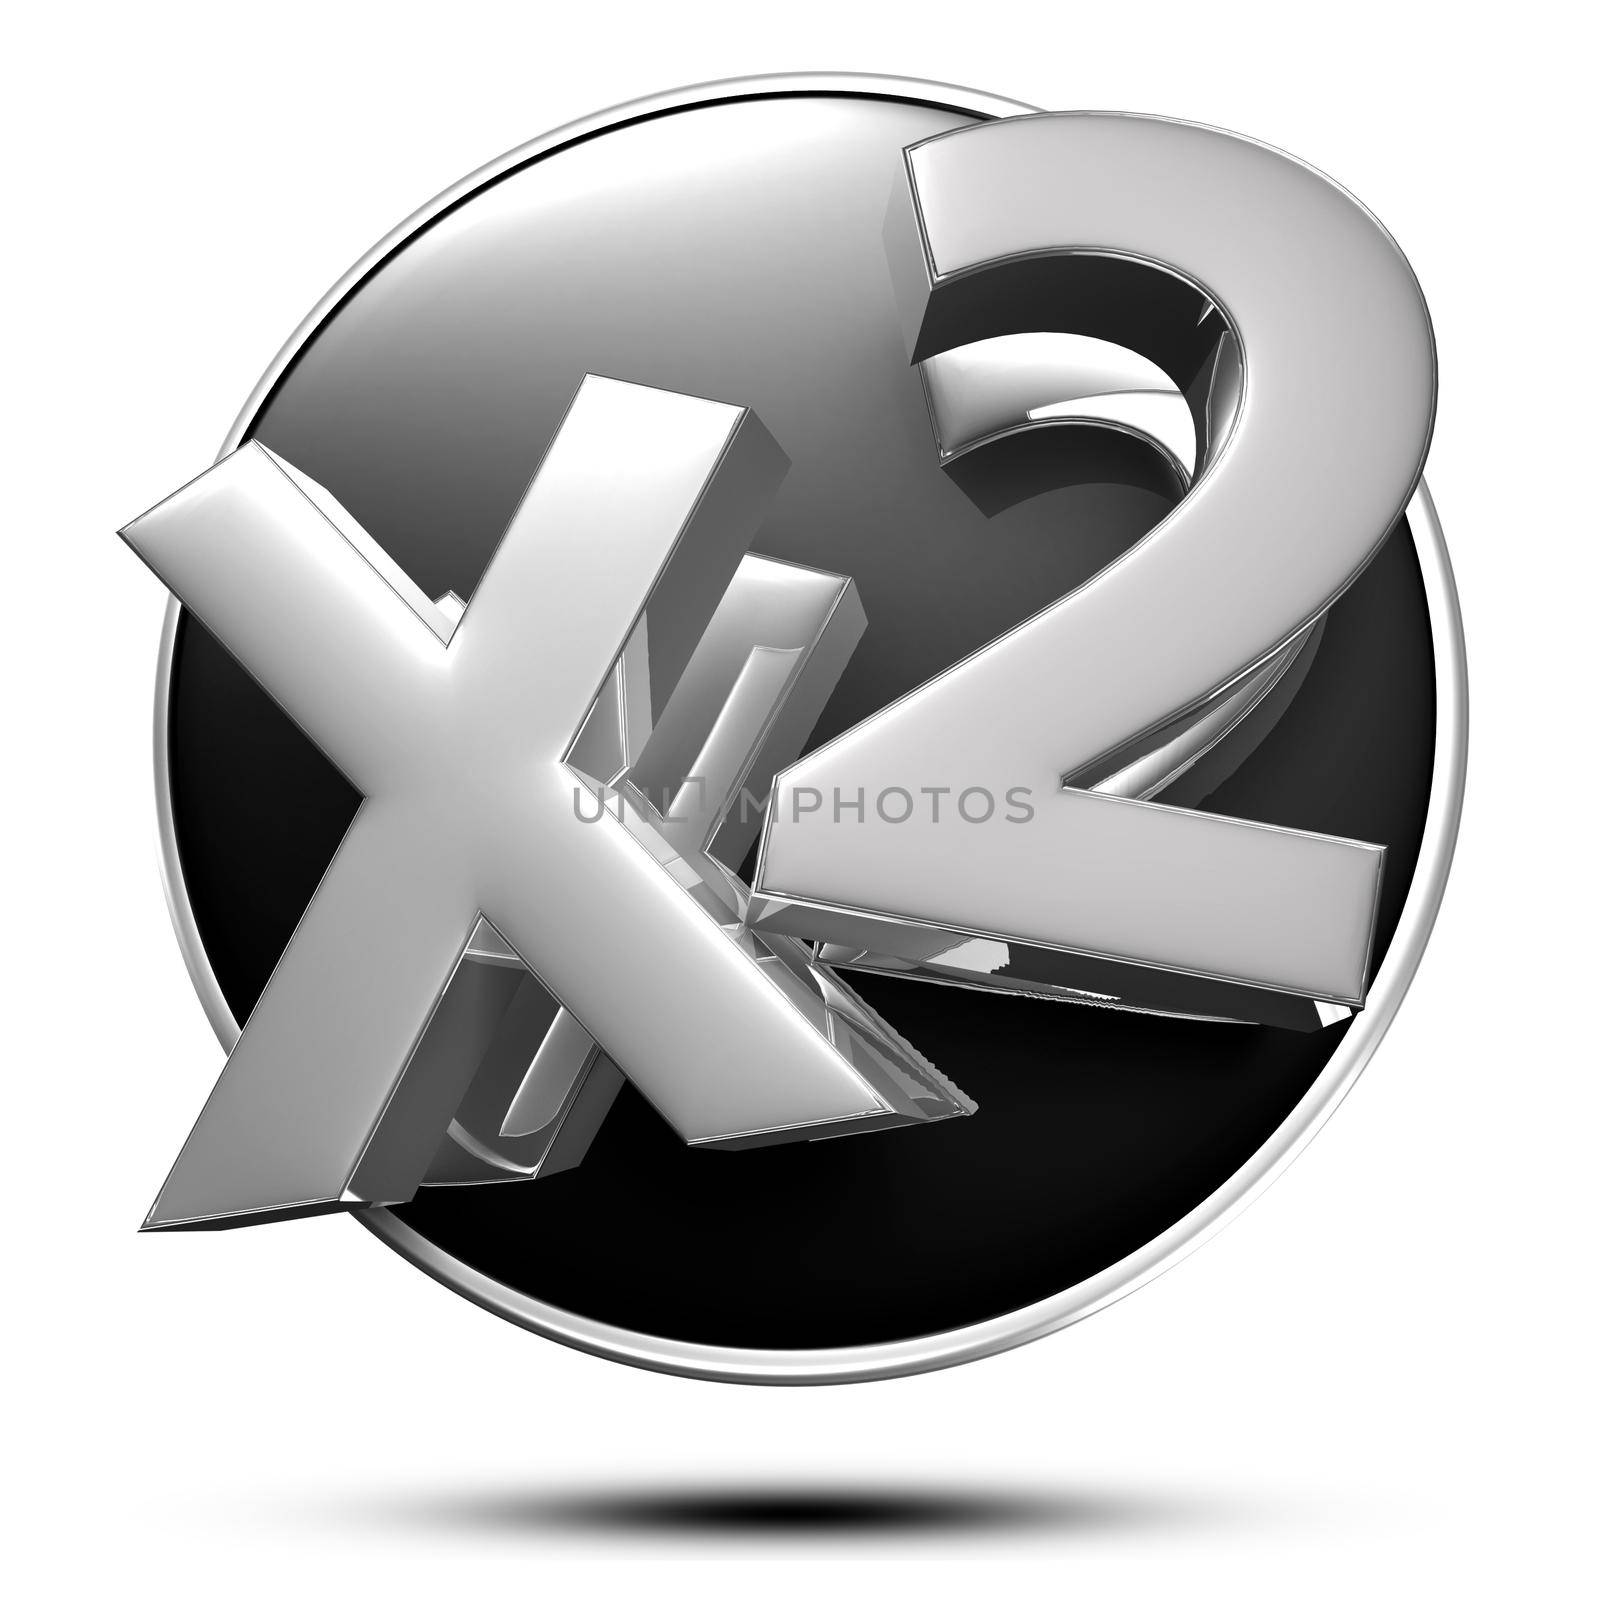 x2 stainless steel isolated on white background illustration 3D rendering with Clipping Path.